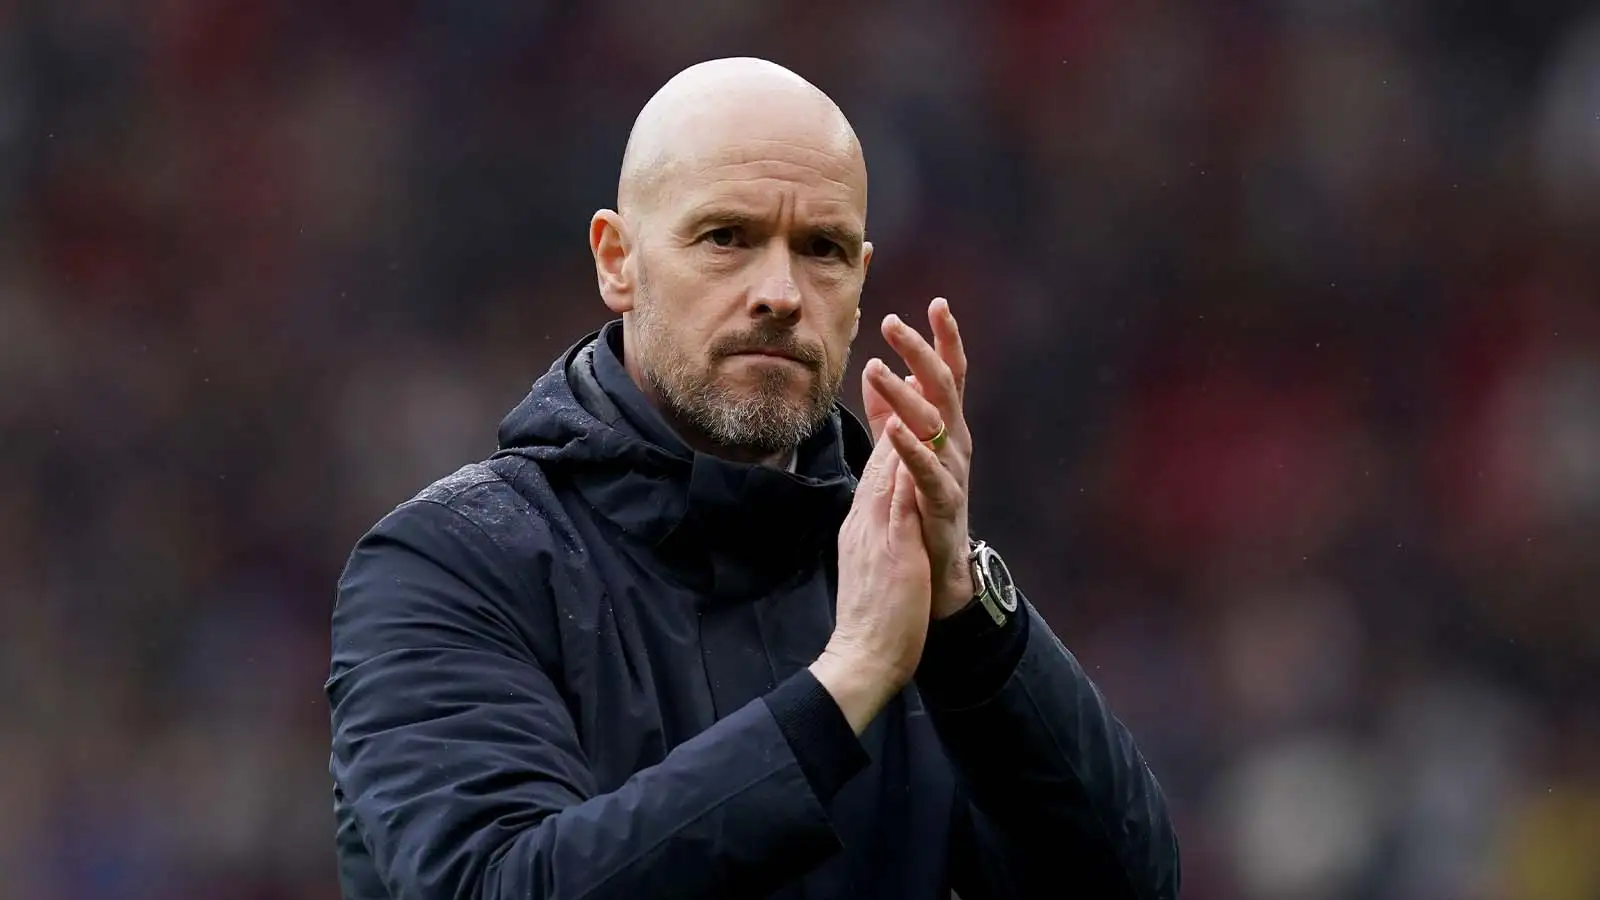 Manchester United manager Erik ten Hag at full time after the Premier League match at Old Trafford, Manchester. Picture date: Sunday April 30, 2023.